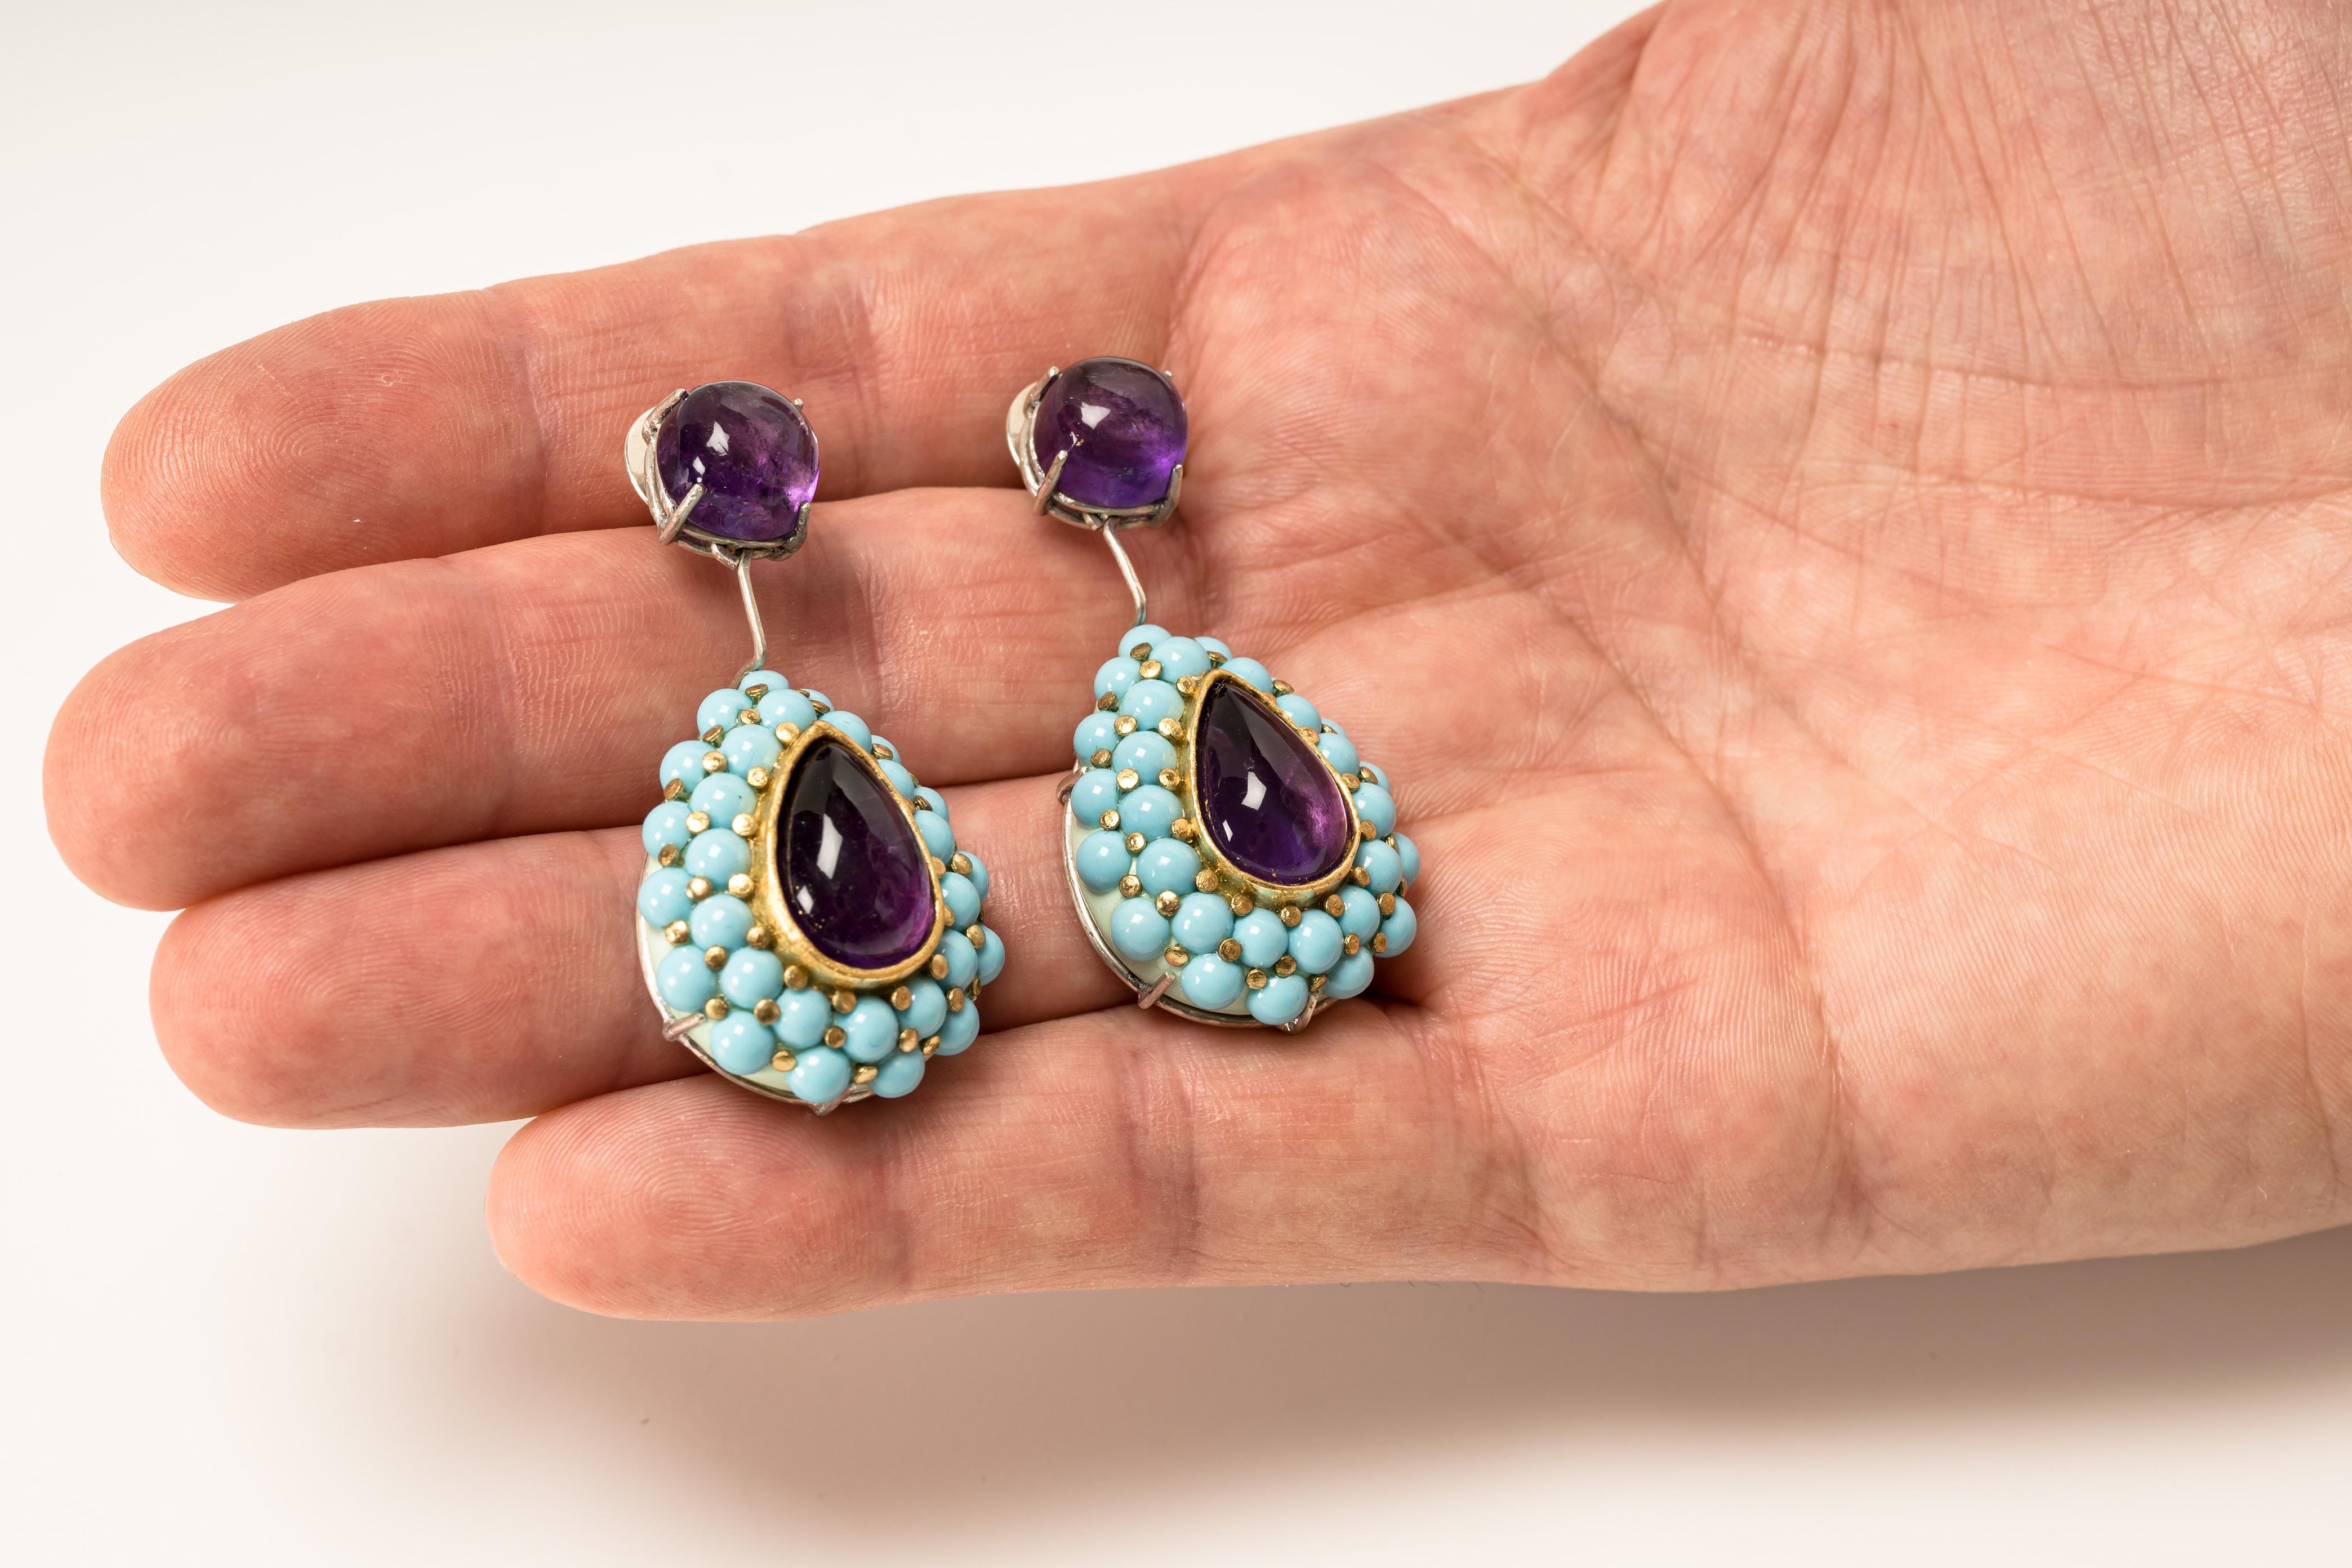 Earrings “Fytro”, 2022, are a one-of-a-kind contemporary author jewelry by italian artist Gian Luca Bartellone.
Materials: papier-mâché, gold 18kt, silver, amethysts, turquoise paste, gold leaf 22kt.

The main body is made of papier-mâché and is